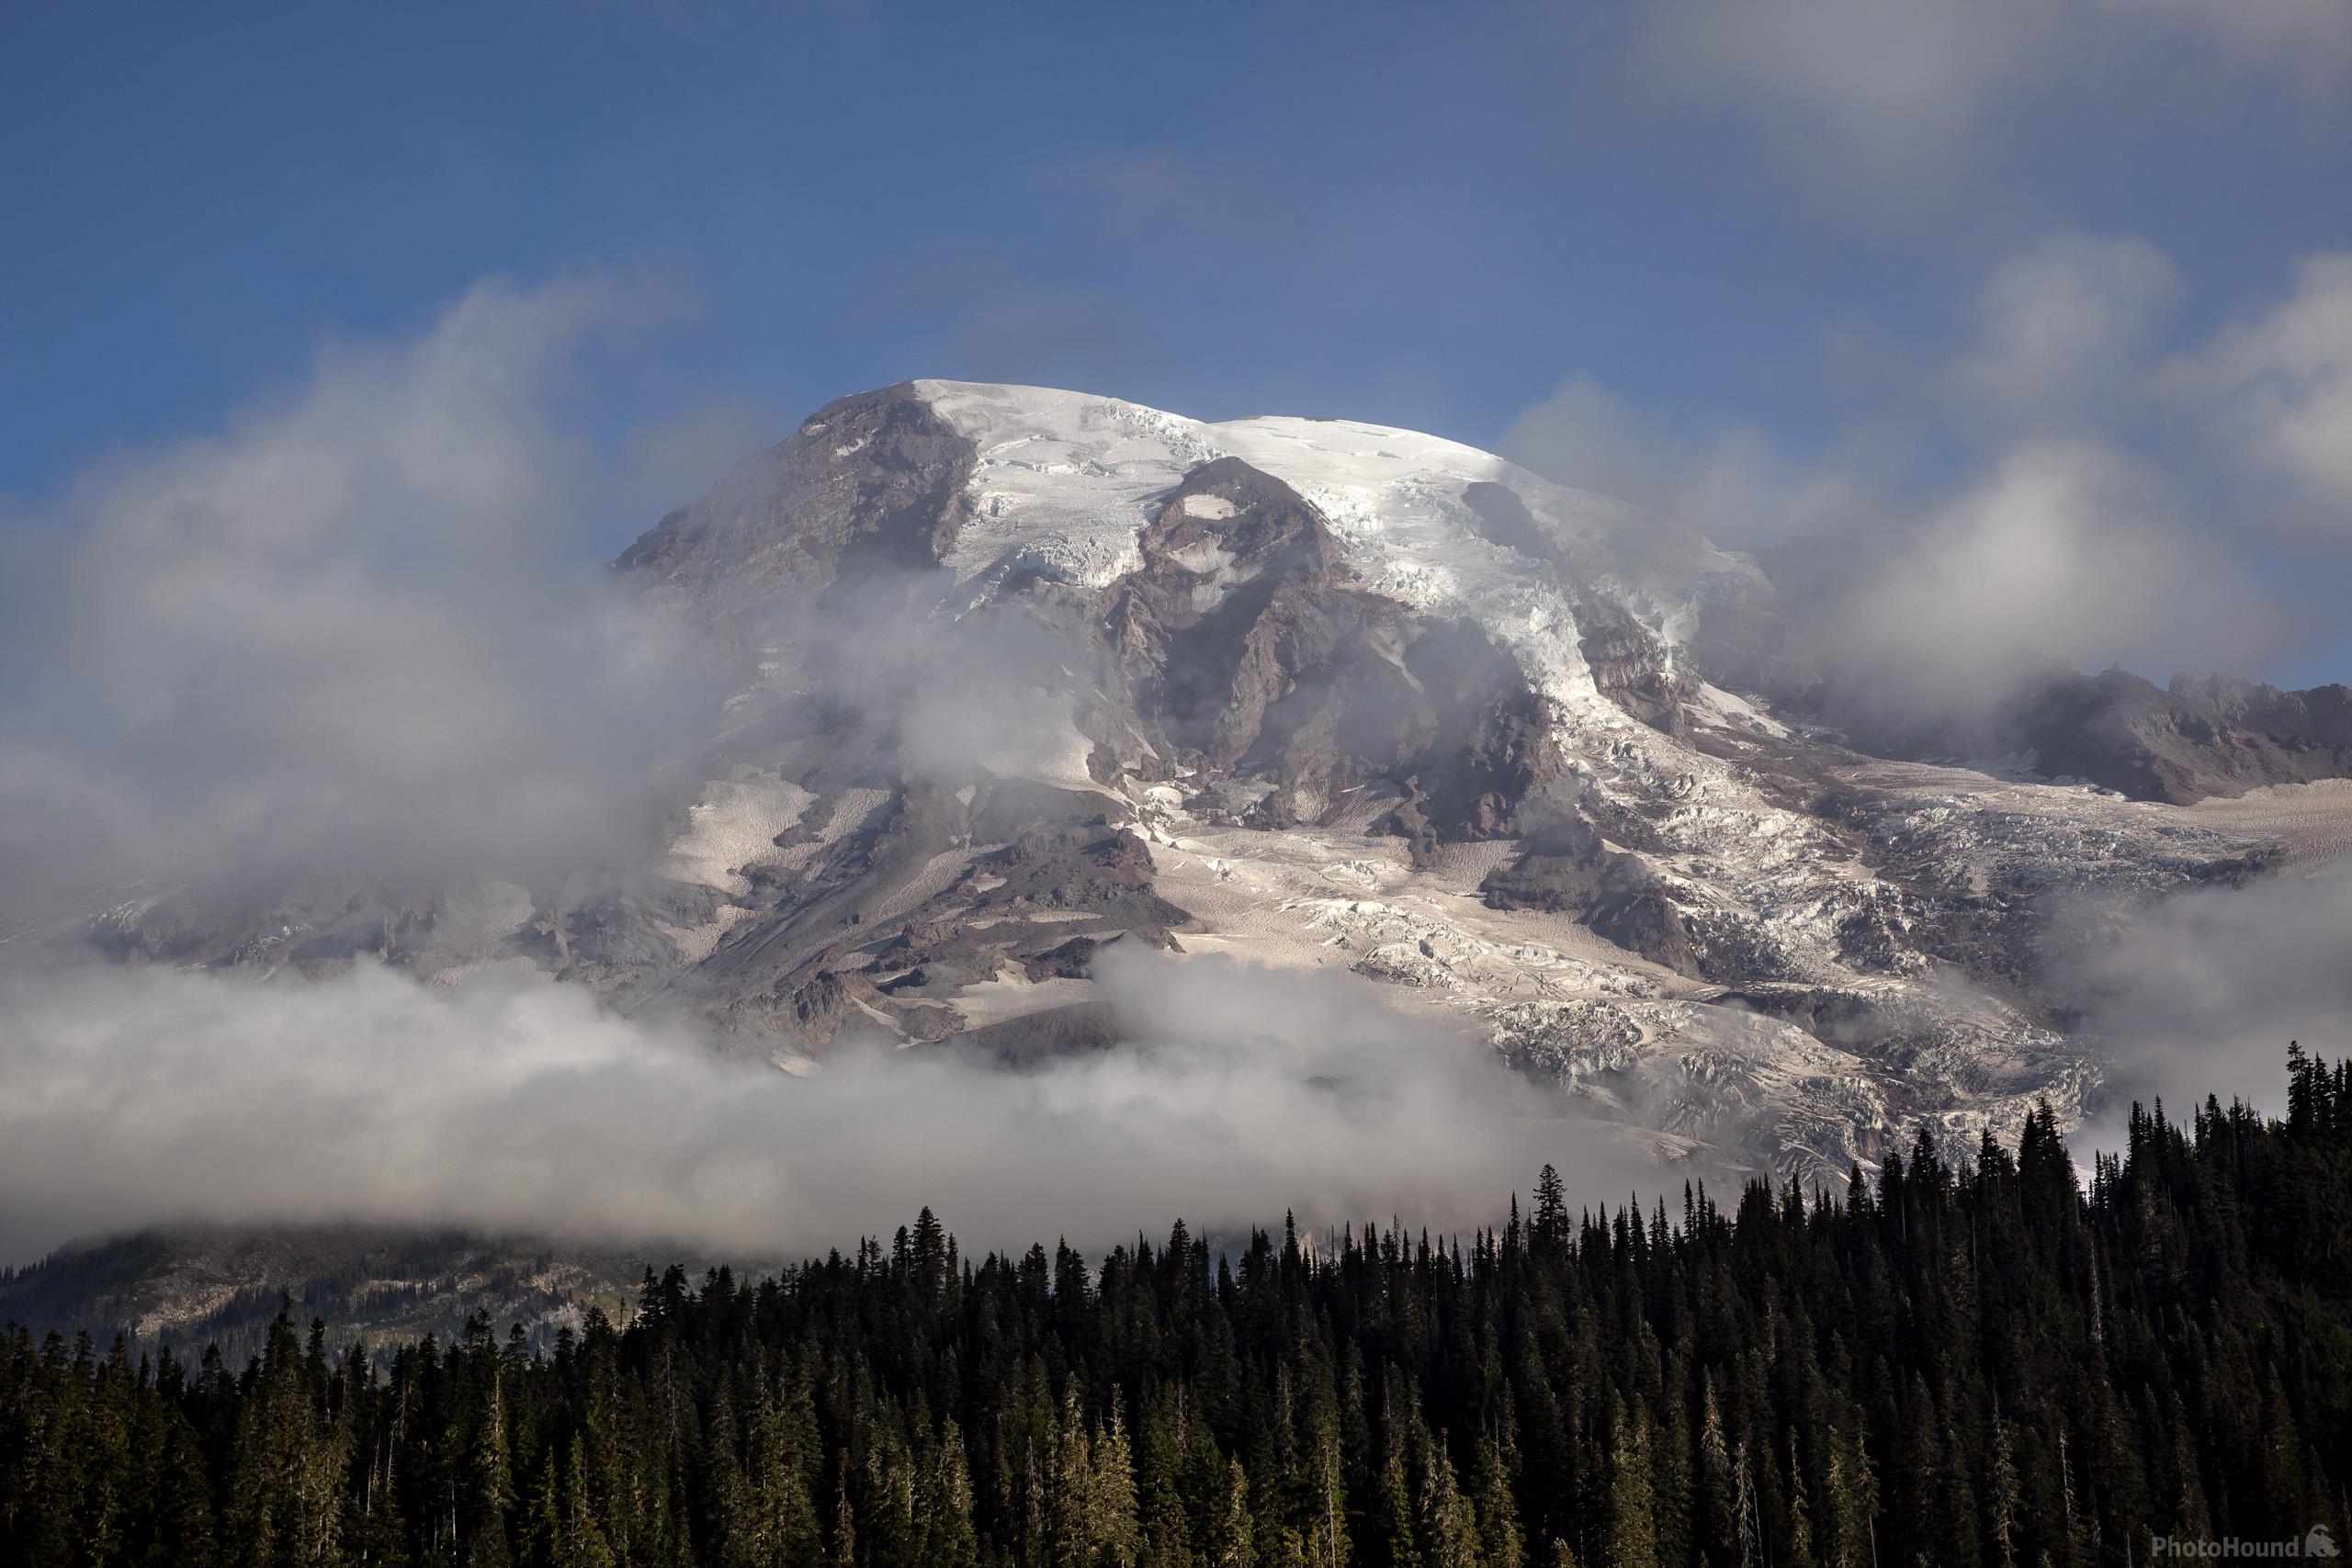 Image of Inspiration Point, Mount Rainier National Park by T. Kirkendall and V. Spring